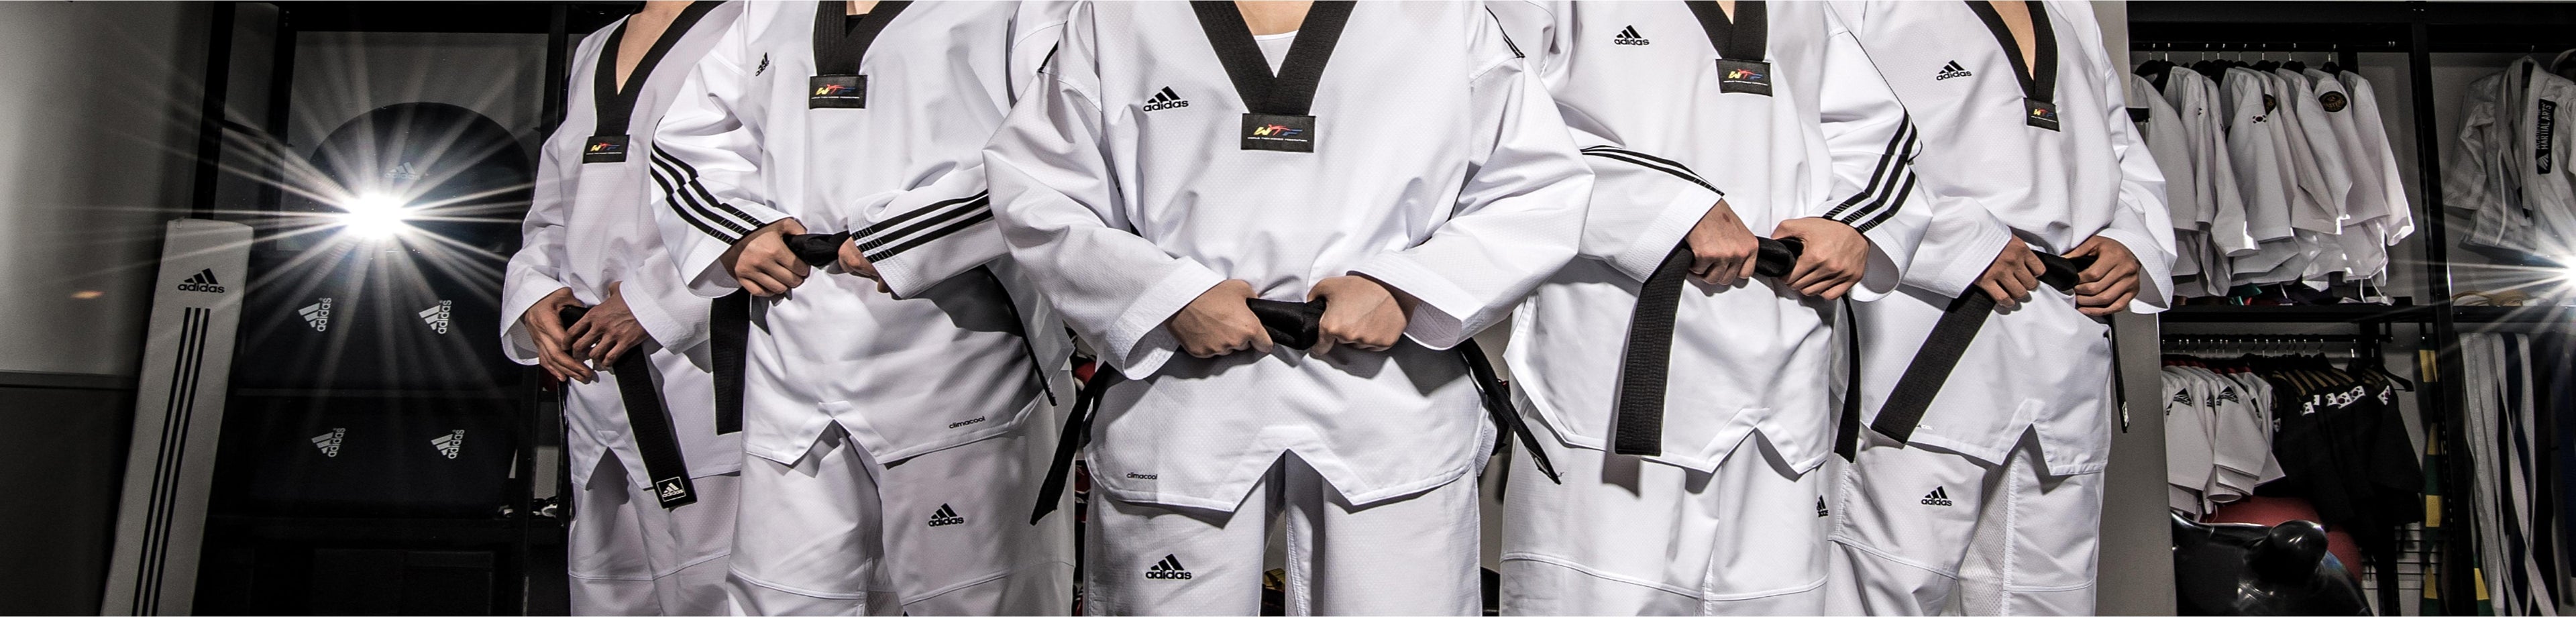 Shop Taekwondo equipment and accessories online. You can find different Taekwondo brands like Adidas, Daedo, Pine Tree, Gladiator, and others. Find also nutritional products like peanut butter, clarinol, lypotrol, and healthy snacks for kids.